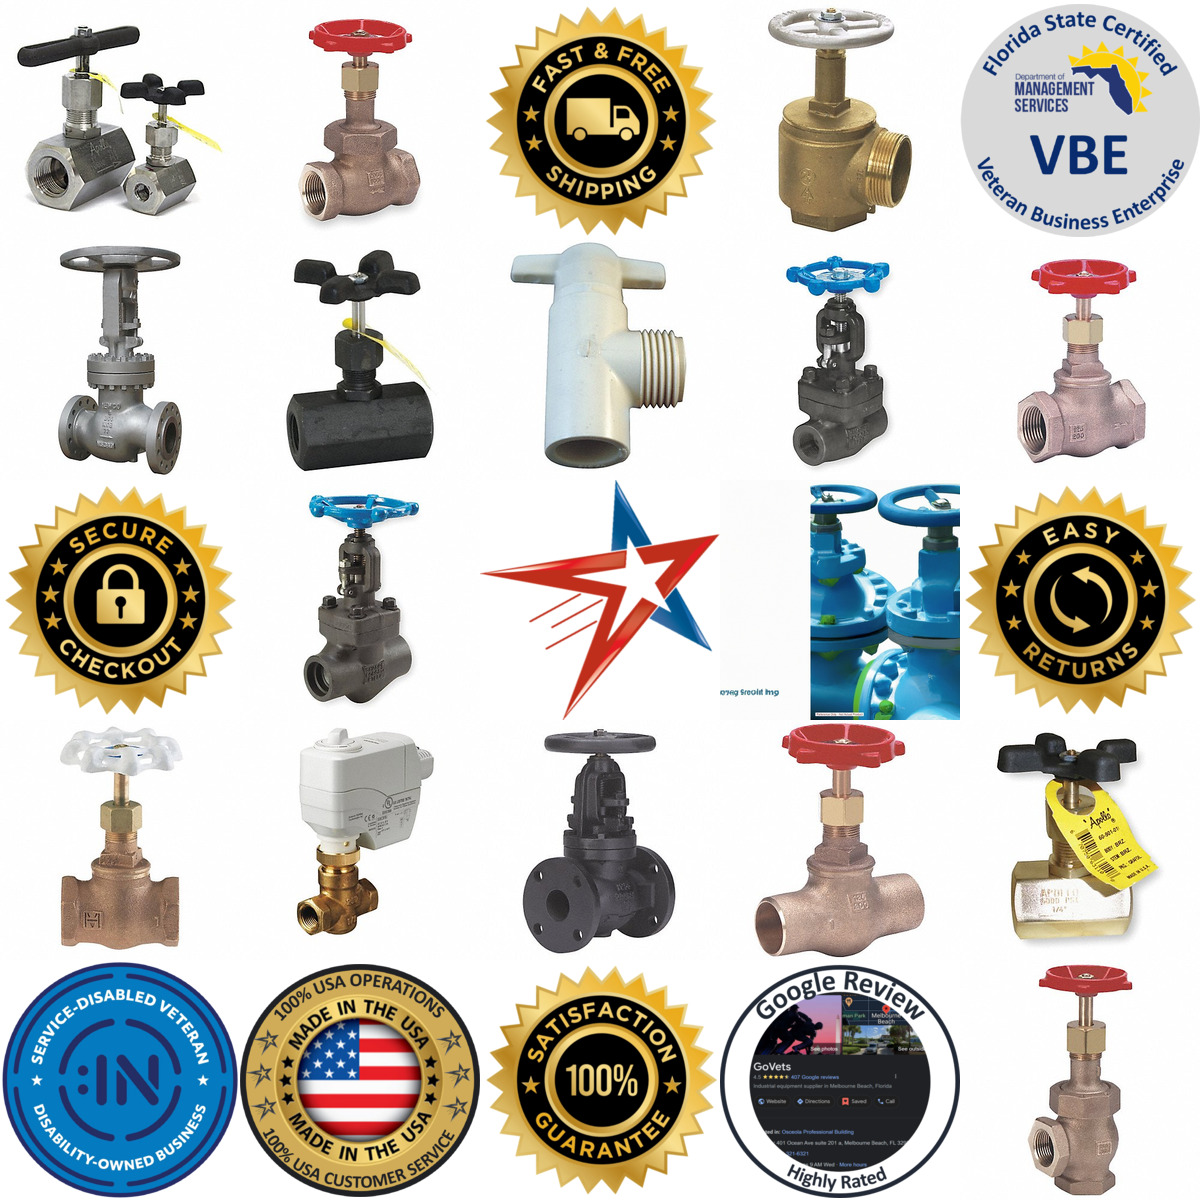 A selection of Globe Valves products on GoVets